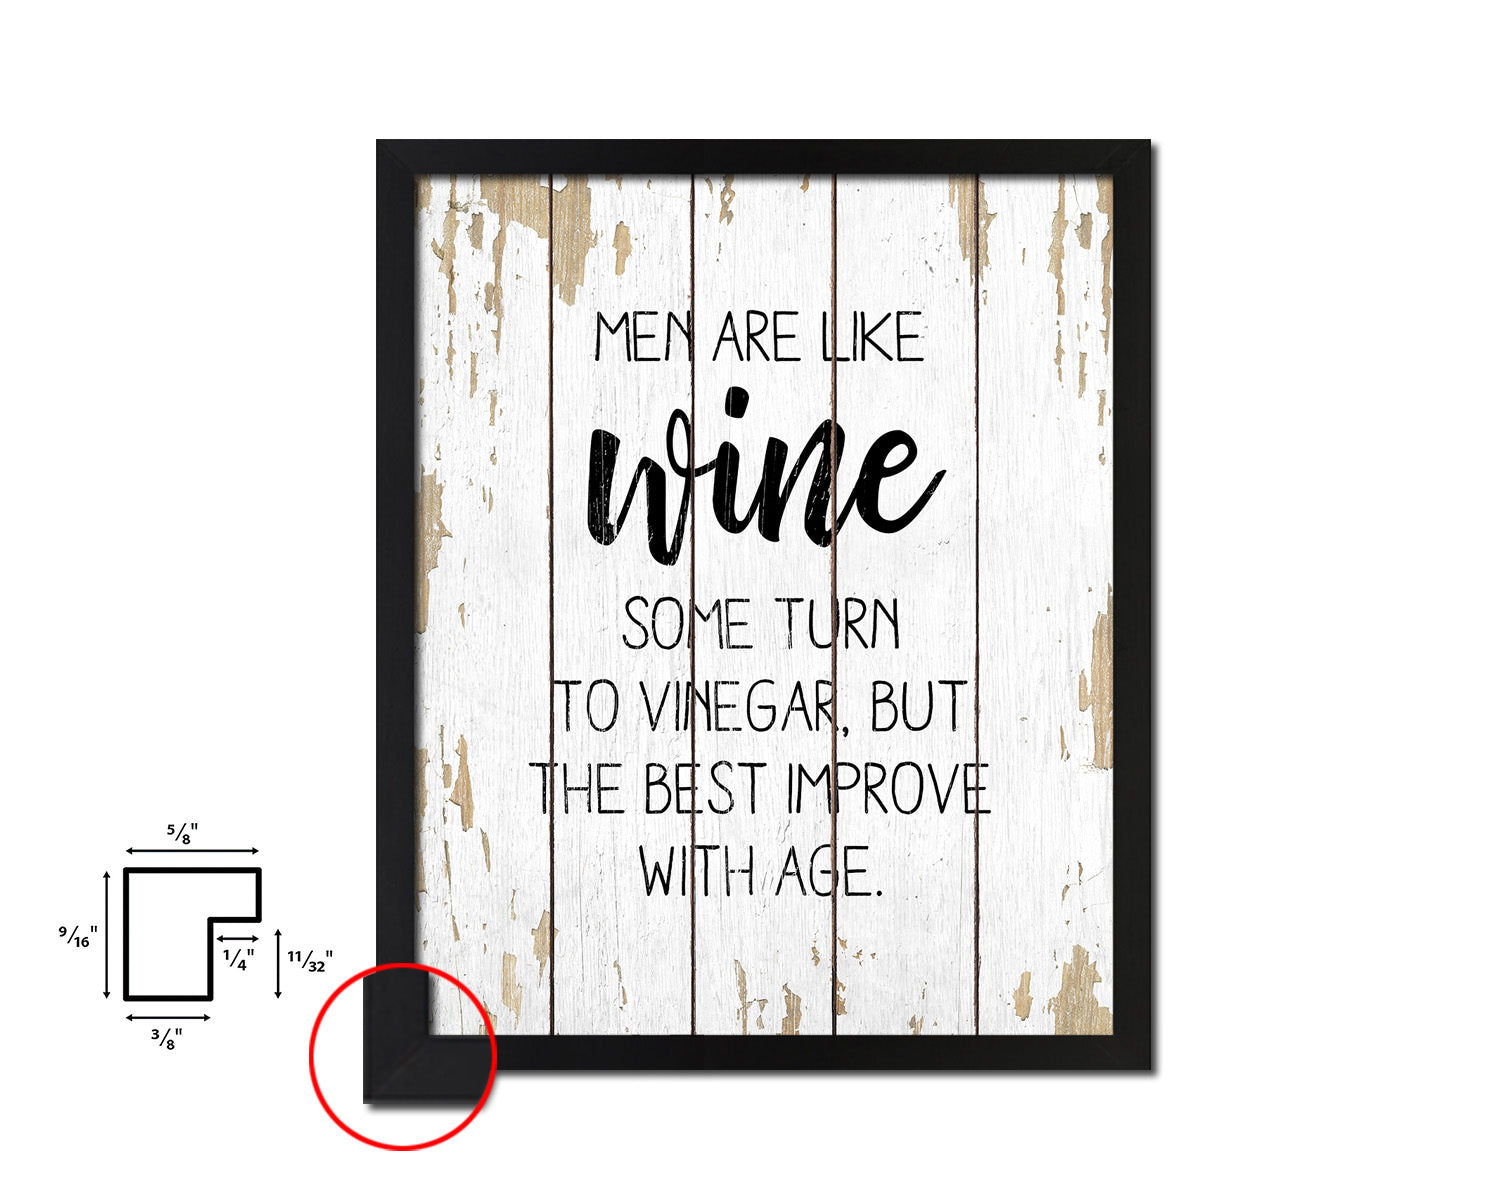 Men are like wine some turn to vinegar Words Wood Framed Print Wall Decor Art Gifts